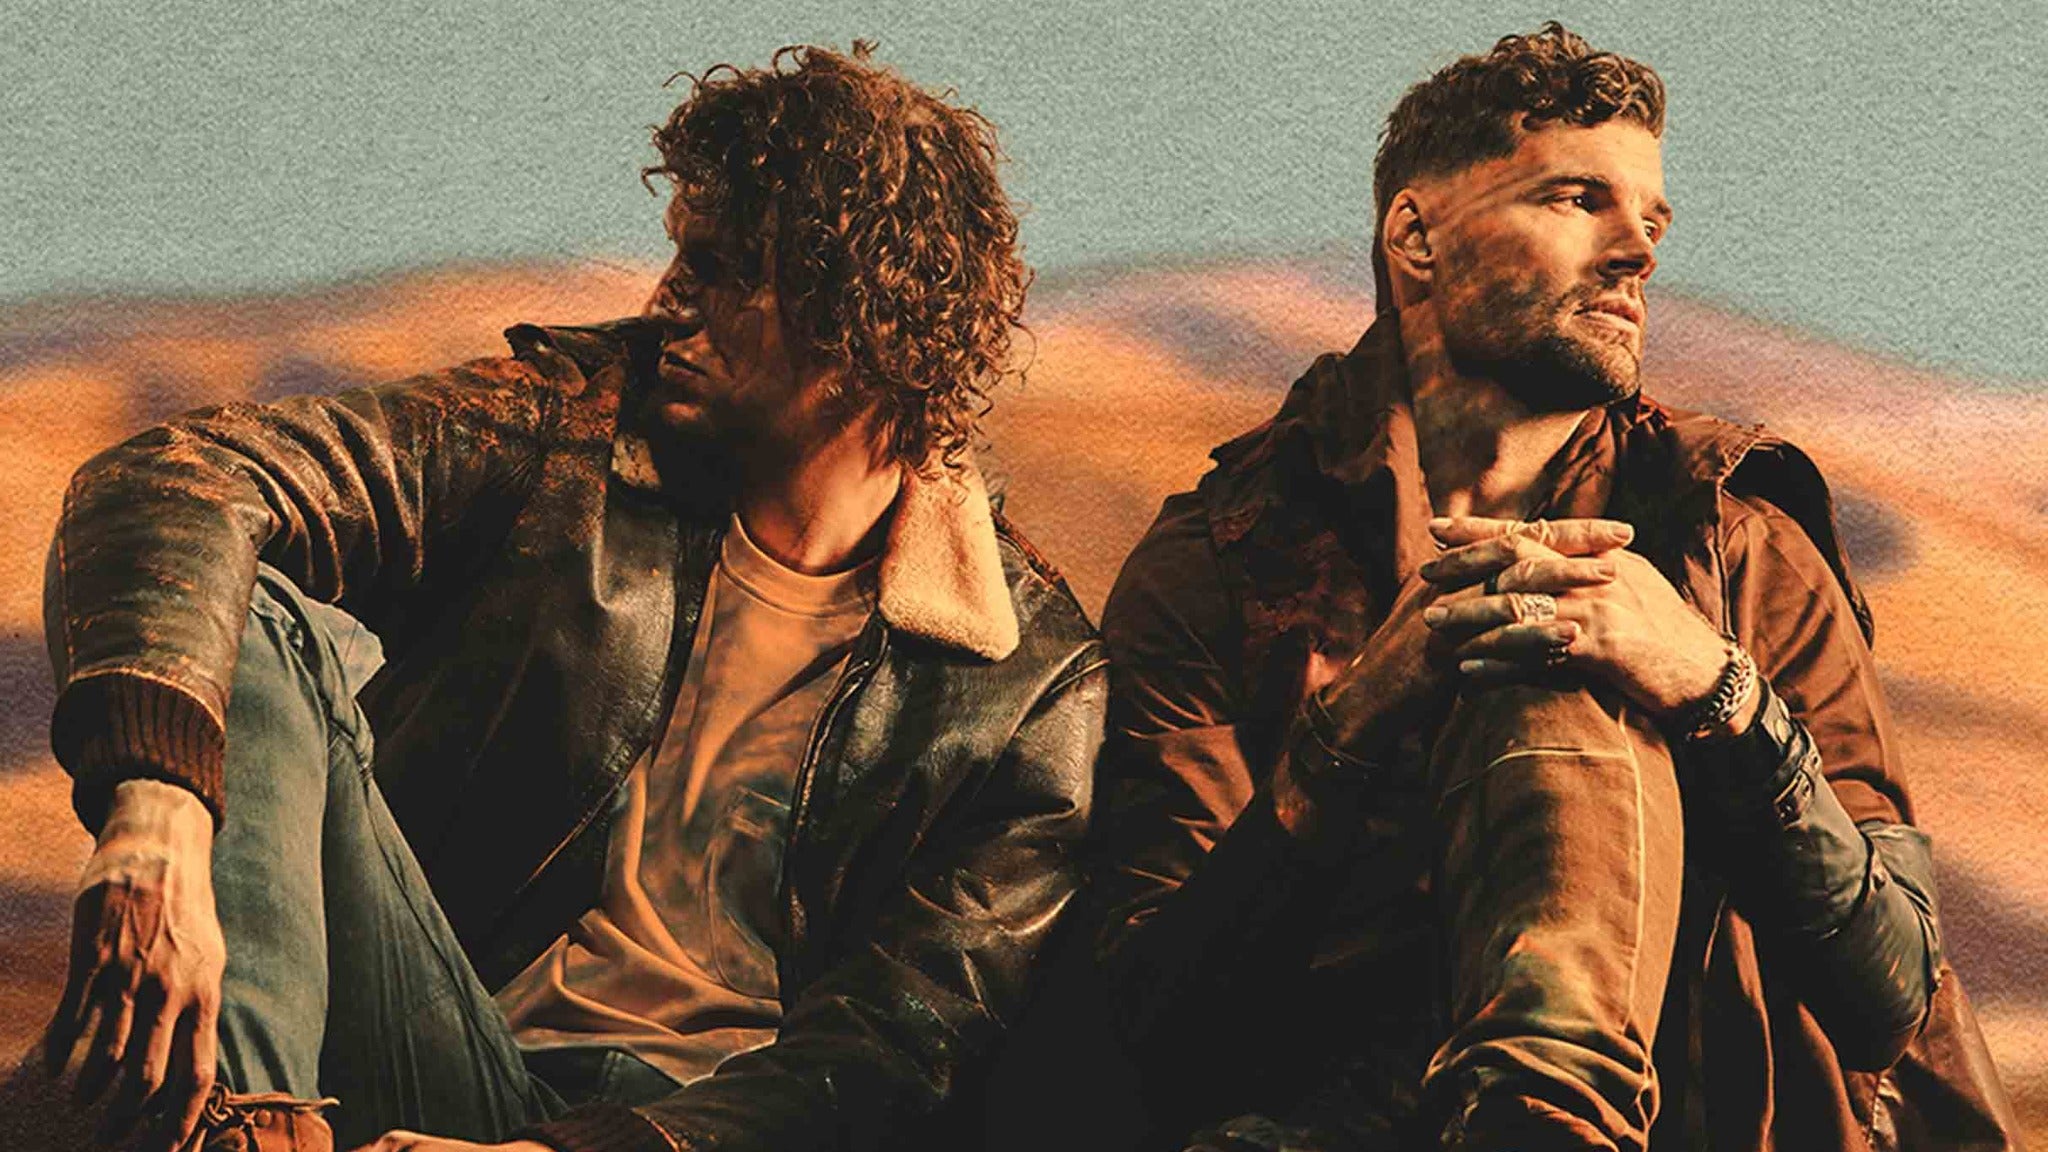 For King & Country at T-Mobile Center